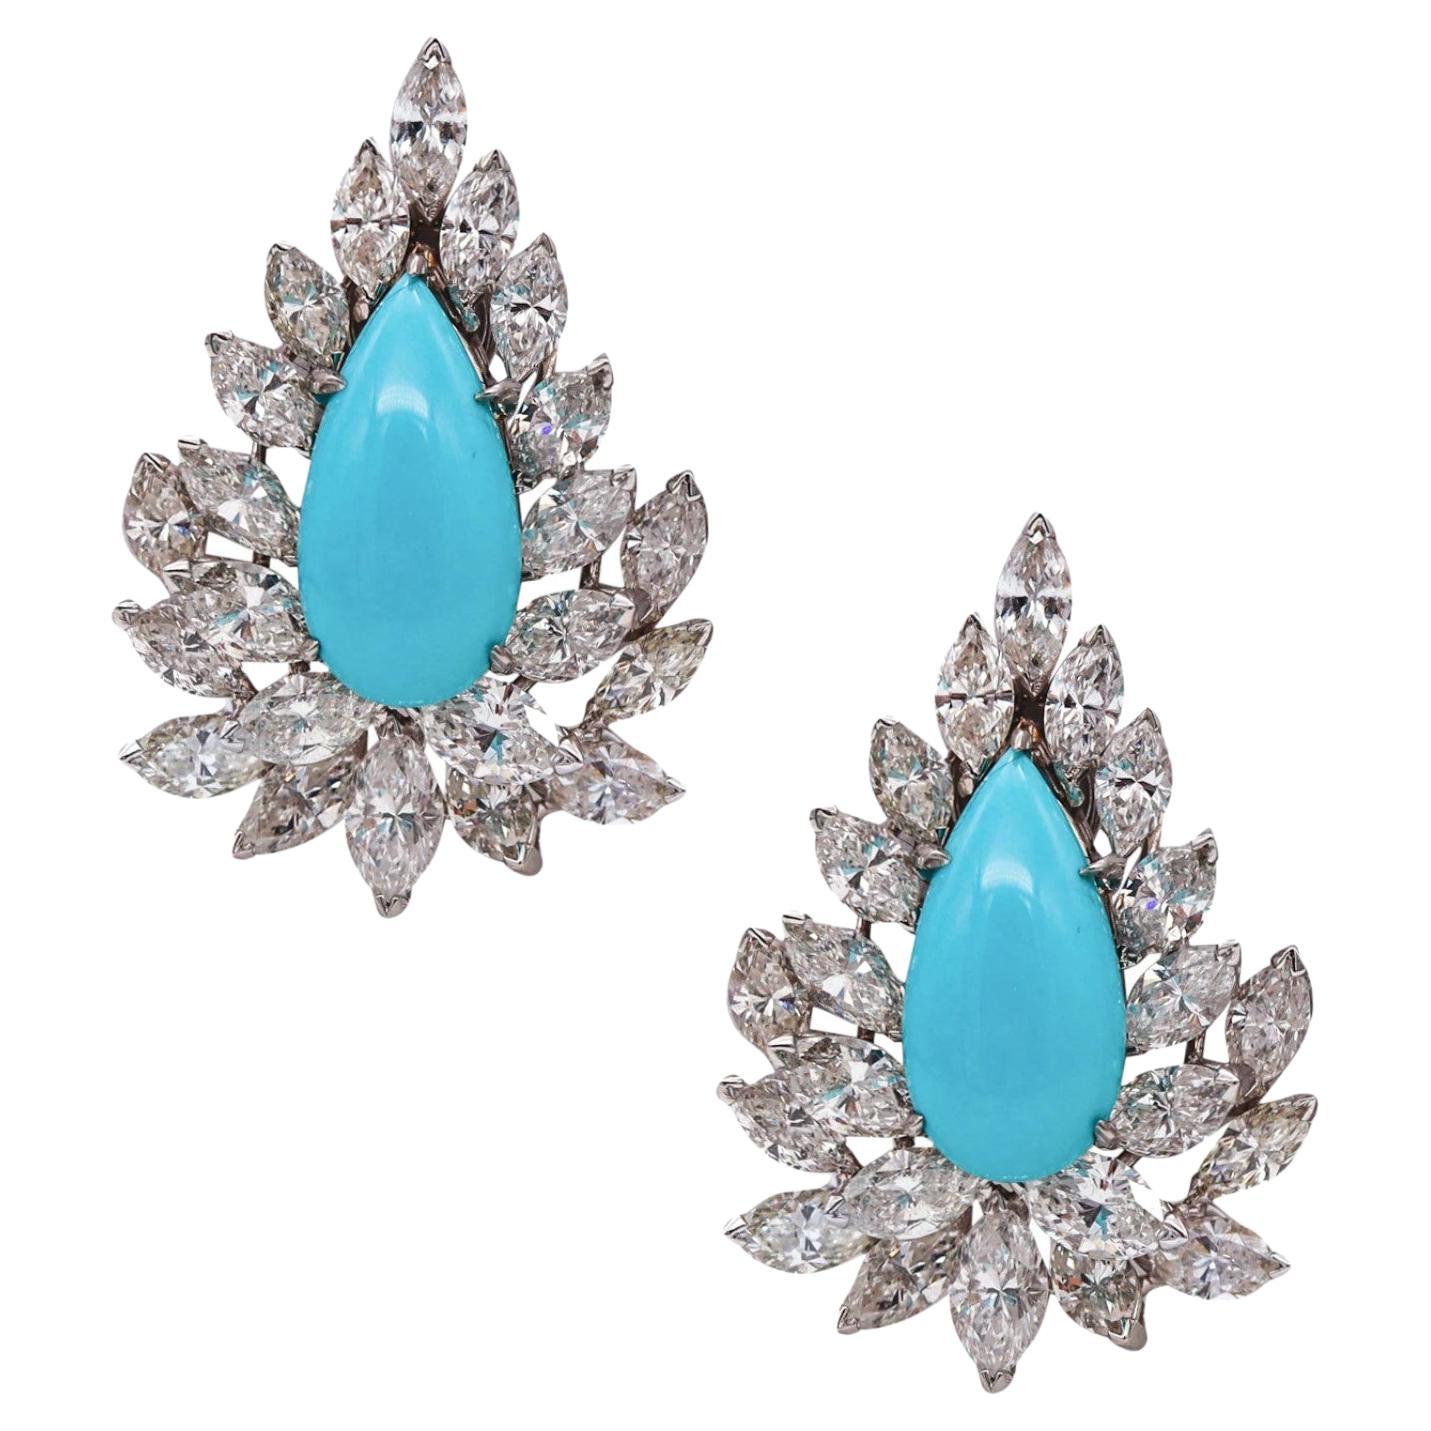 Gem Cluster Clips Earrings in Platinum with 25.11 Cts in Diamonds and Turquoises